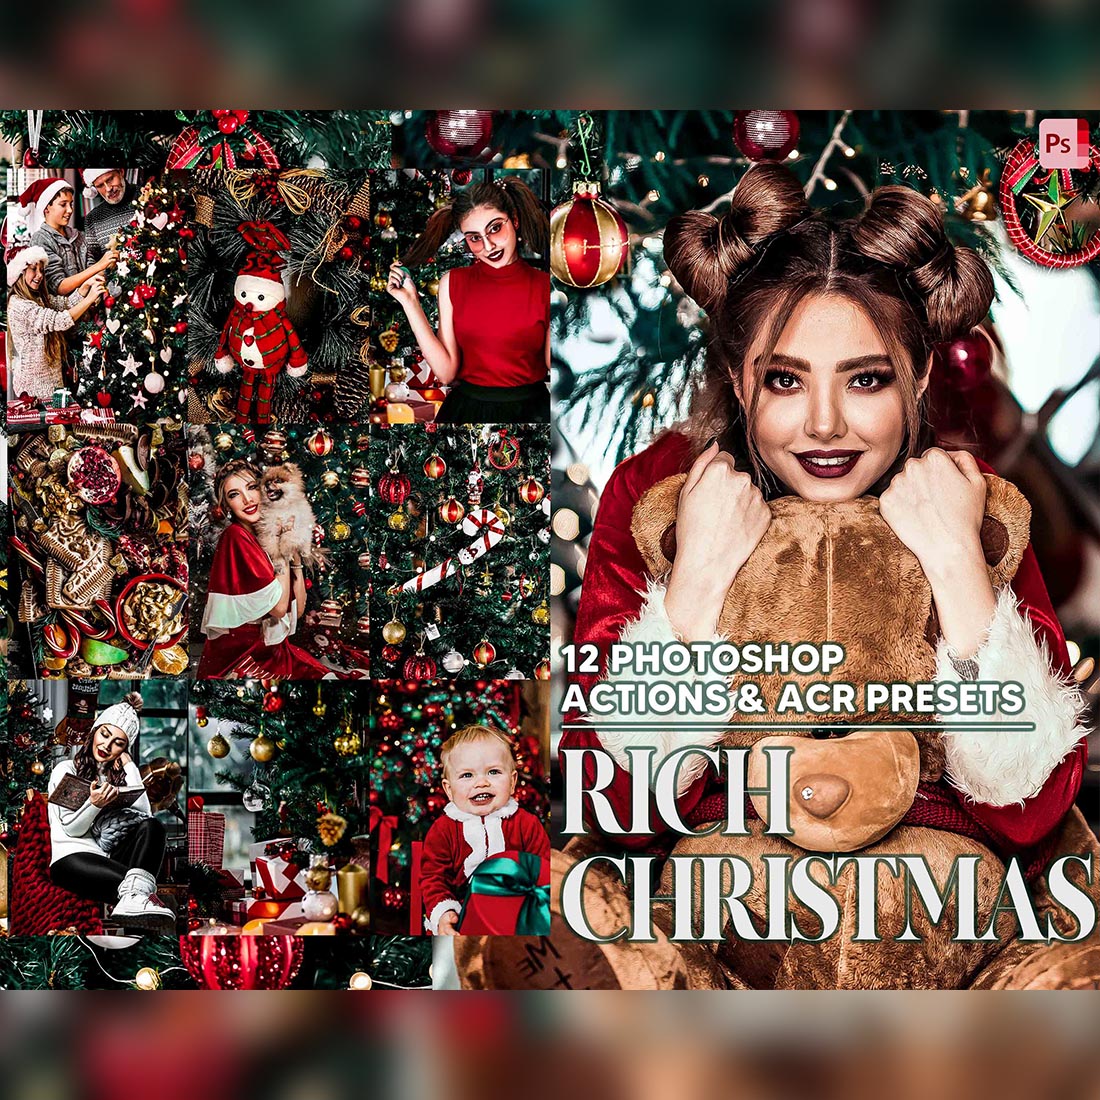 12 Photoshop Actions, Rich Christmas Ps Action, Moody ACR Preset, Winter Ps Filter, Atn Portrait And Lifestyle Theme For Instagram, Blogger cover image.